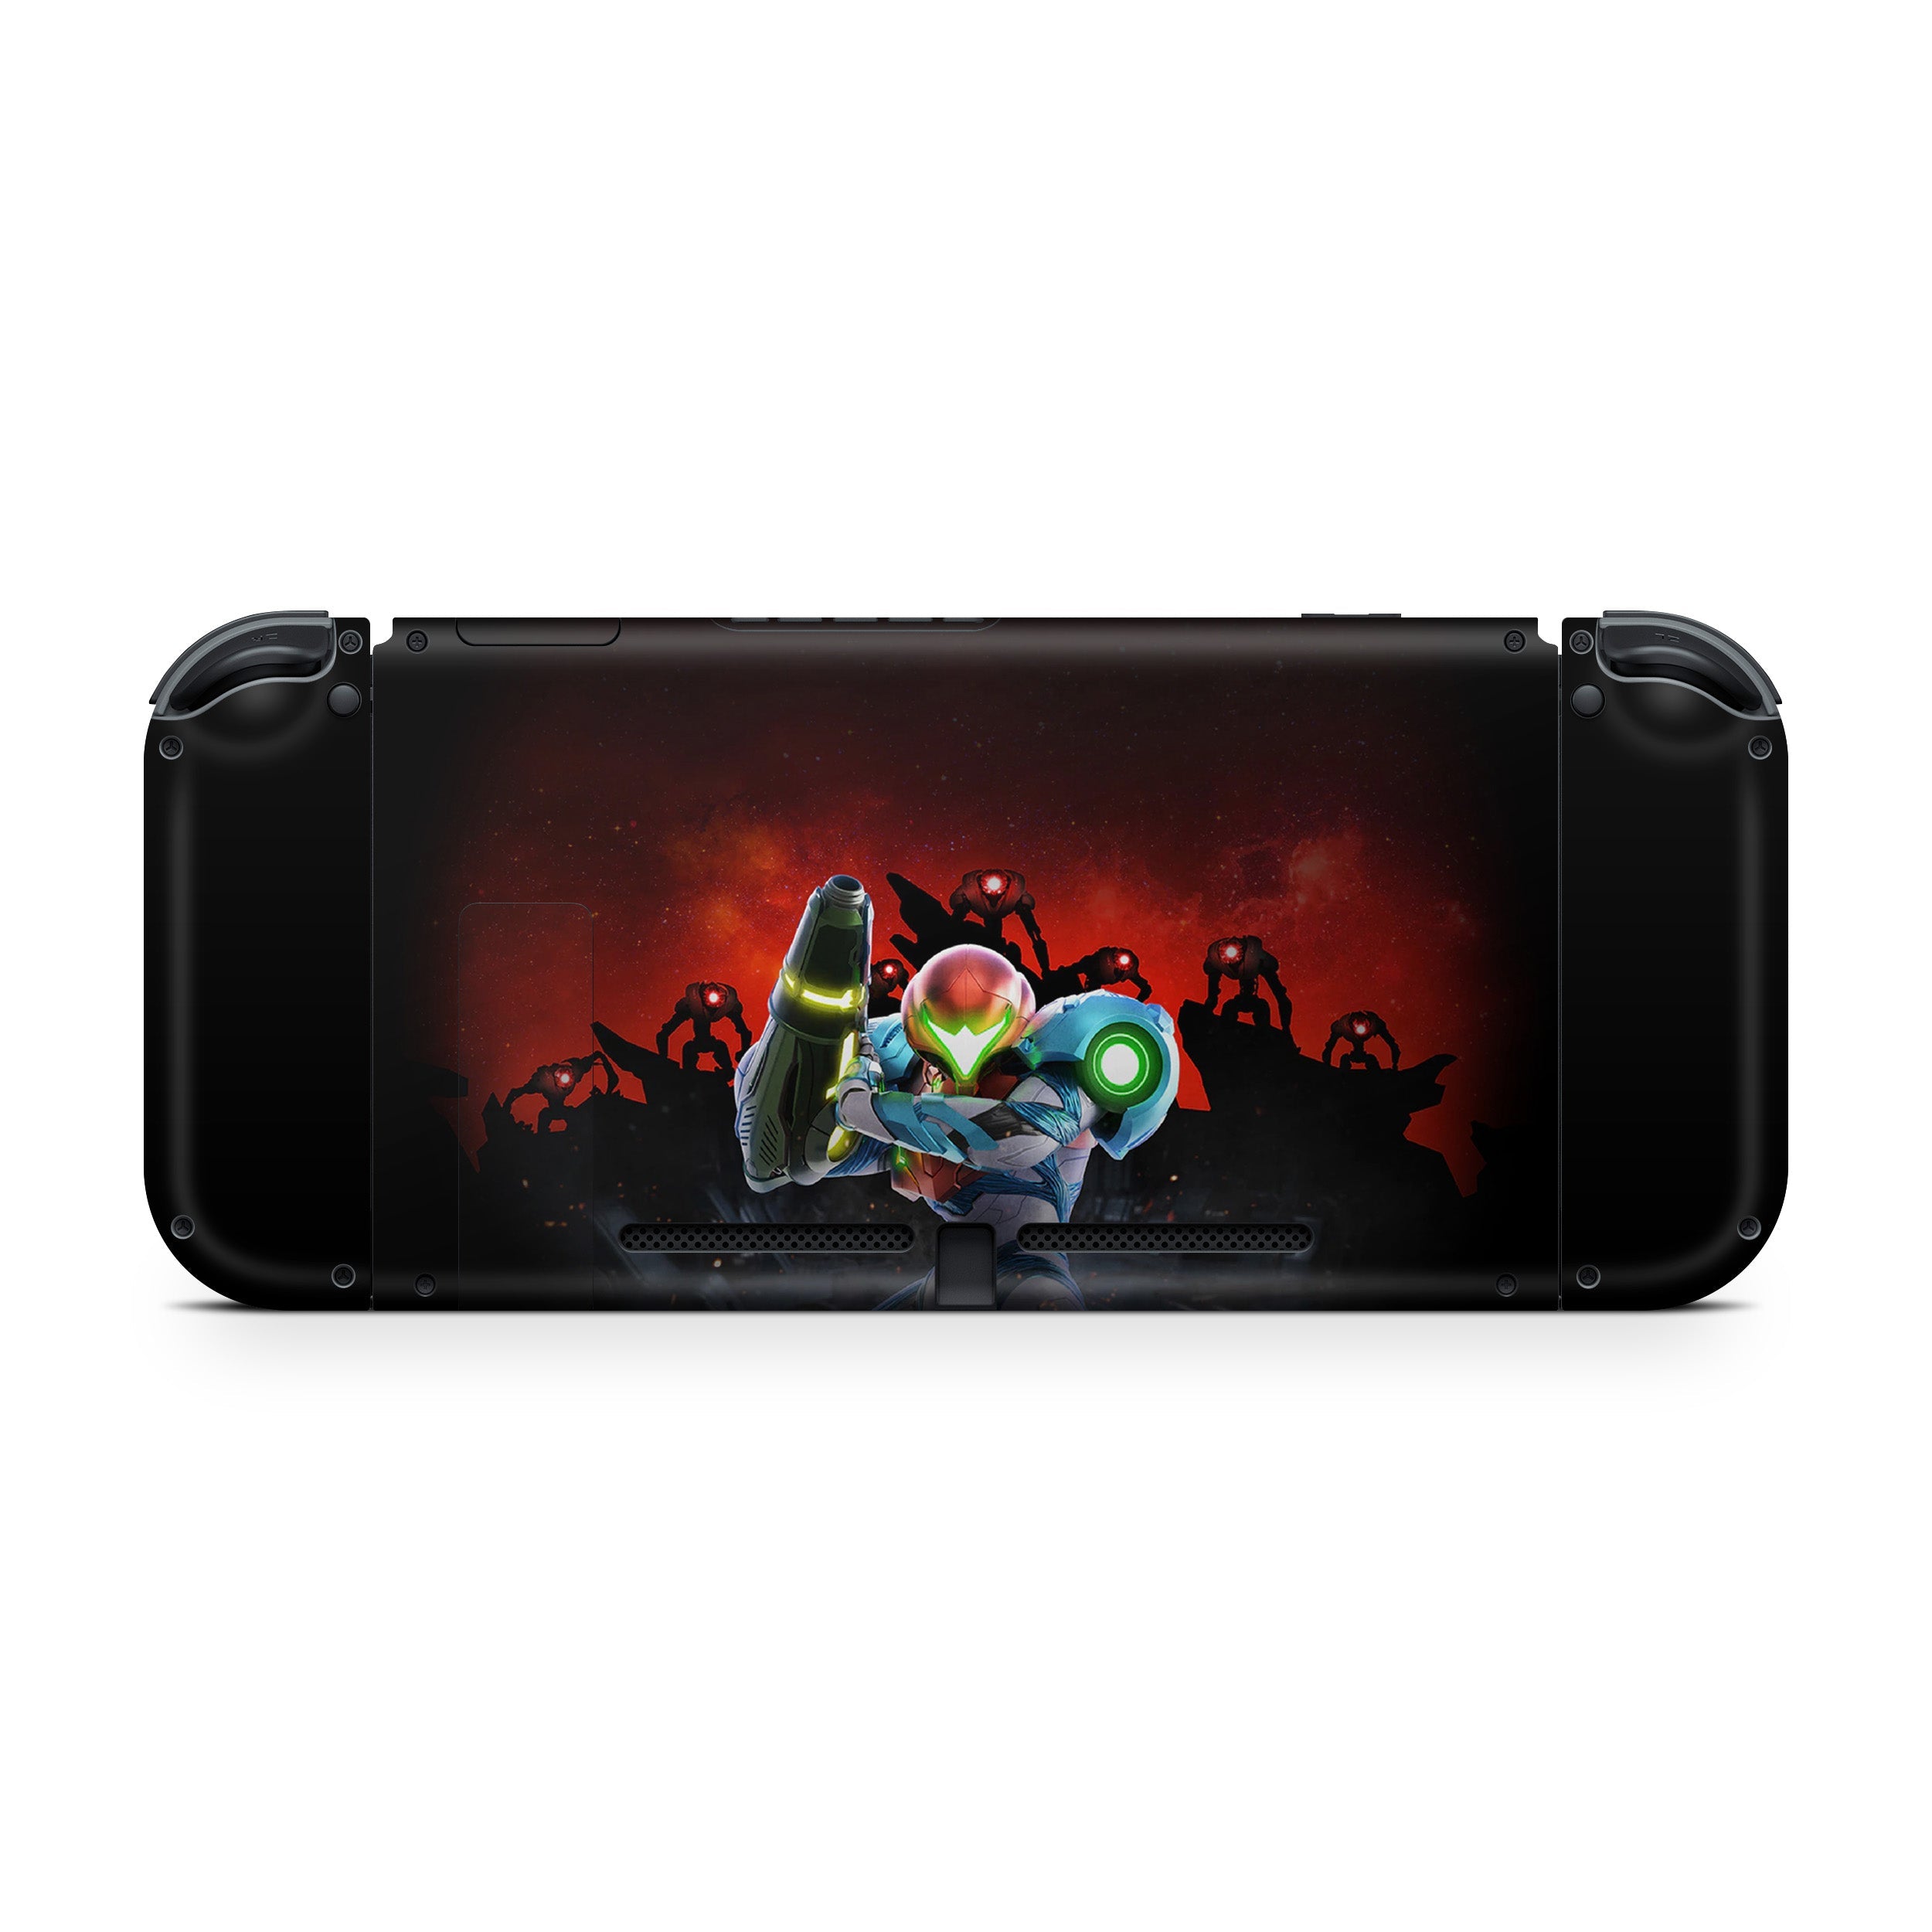 A video game skin featuring a Metroid Dread design for the Nintendo Switch.